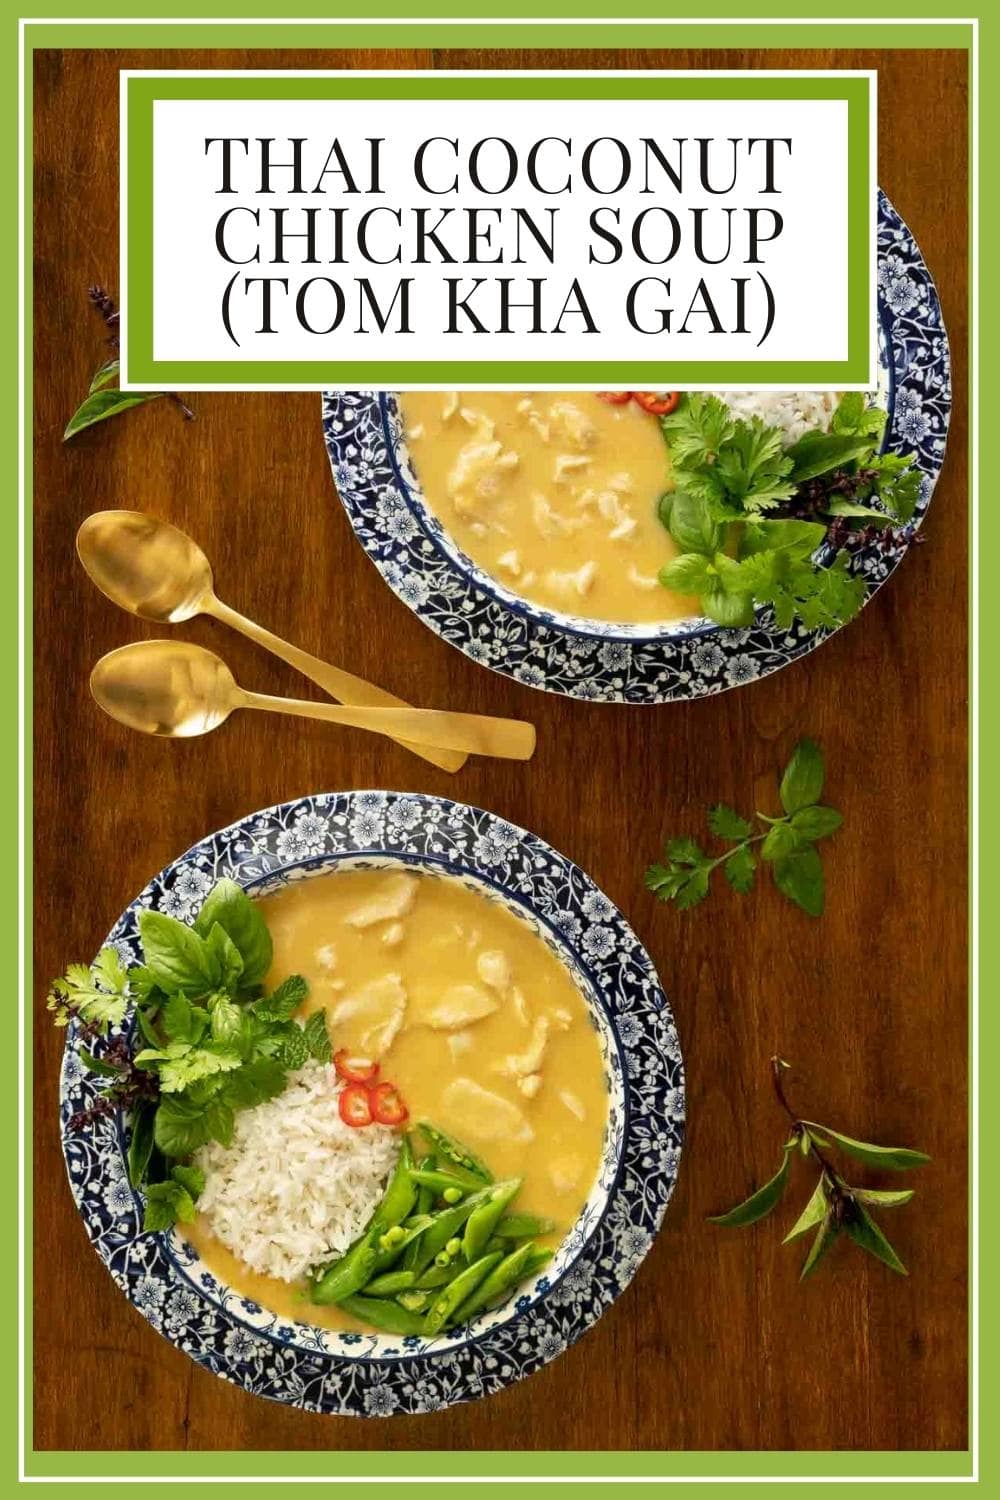 Thai Coconut Chicken Soup (Tom Kha Gai) - You\'ll want to make this one on repeat!